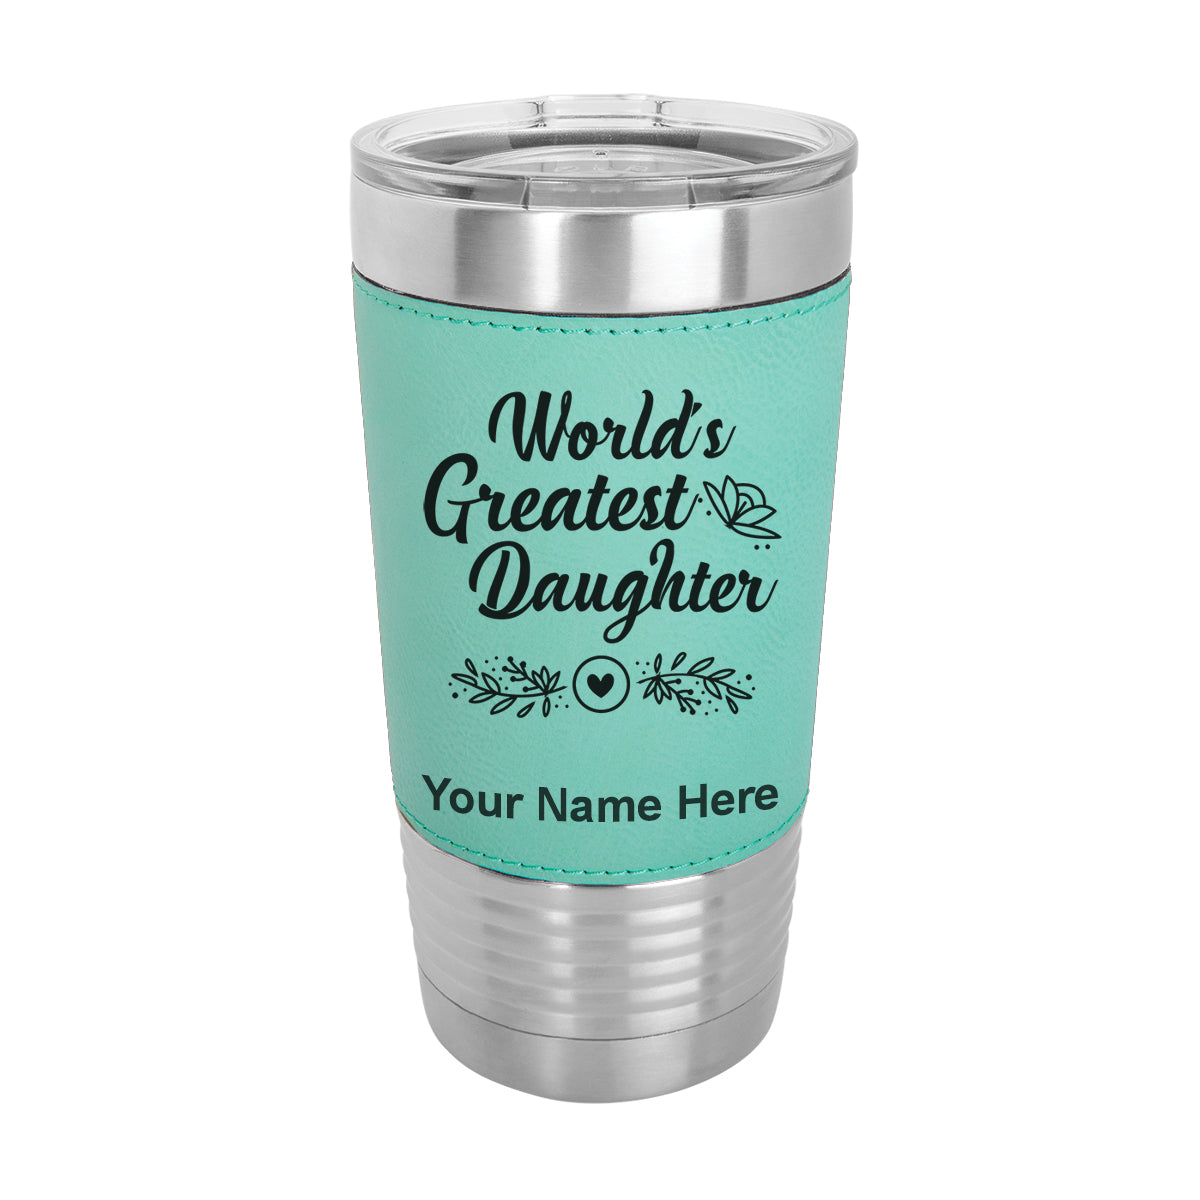 20oz Faux Leather Tumbler Mug, World's Greatest Daughter, Personalized Engraving Included